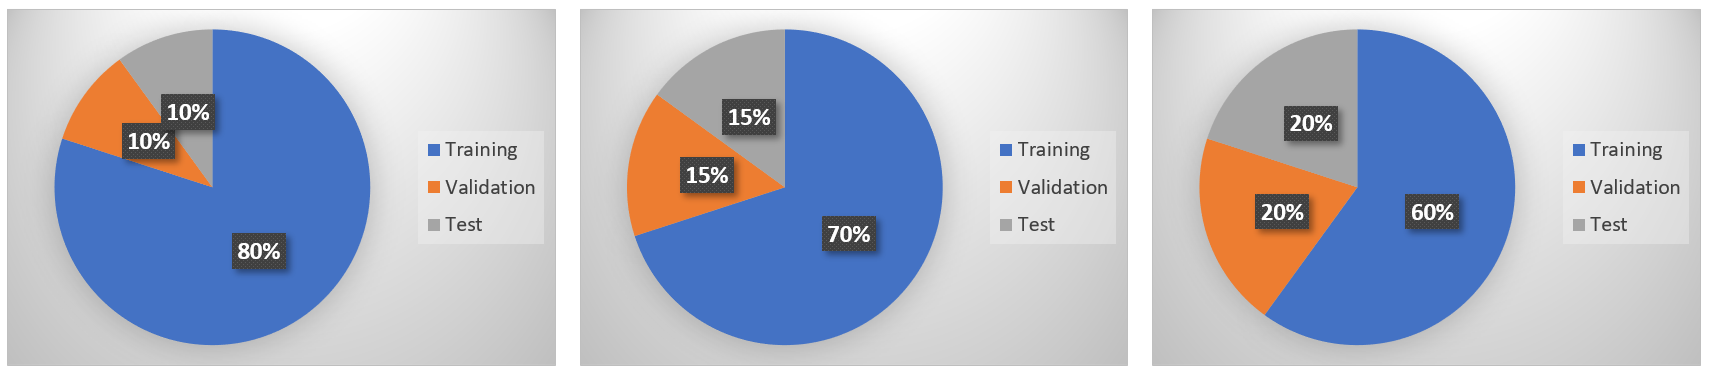 An image of three pie-shaped diagrams that show various percentages of training, validation, and test ratios.